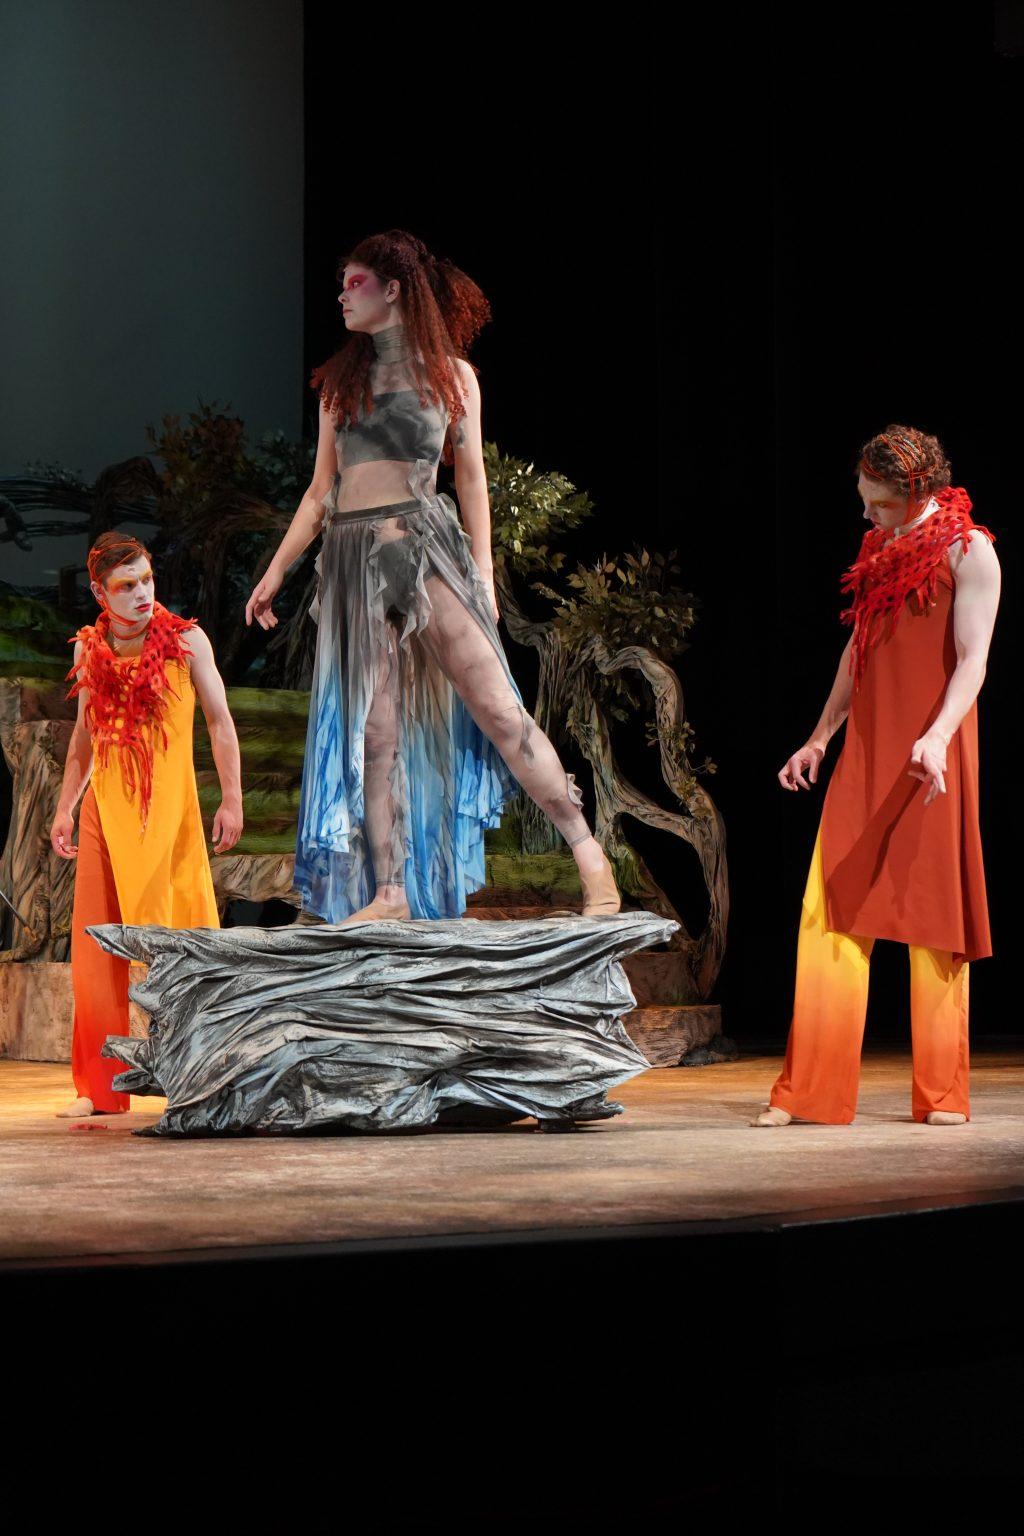 Bryant (center) leads the other spirits as Ariel on April 1, in Smothers Theatre. Ariel is an elemental spirit that acts human, Bryant said.